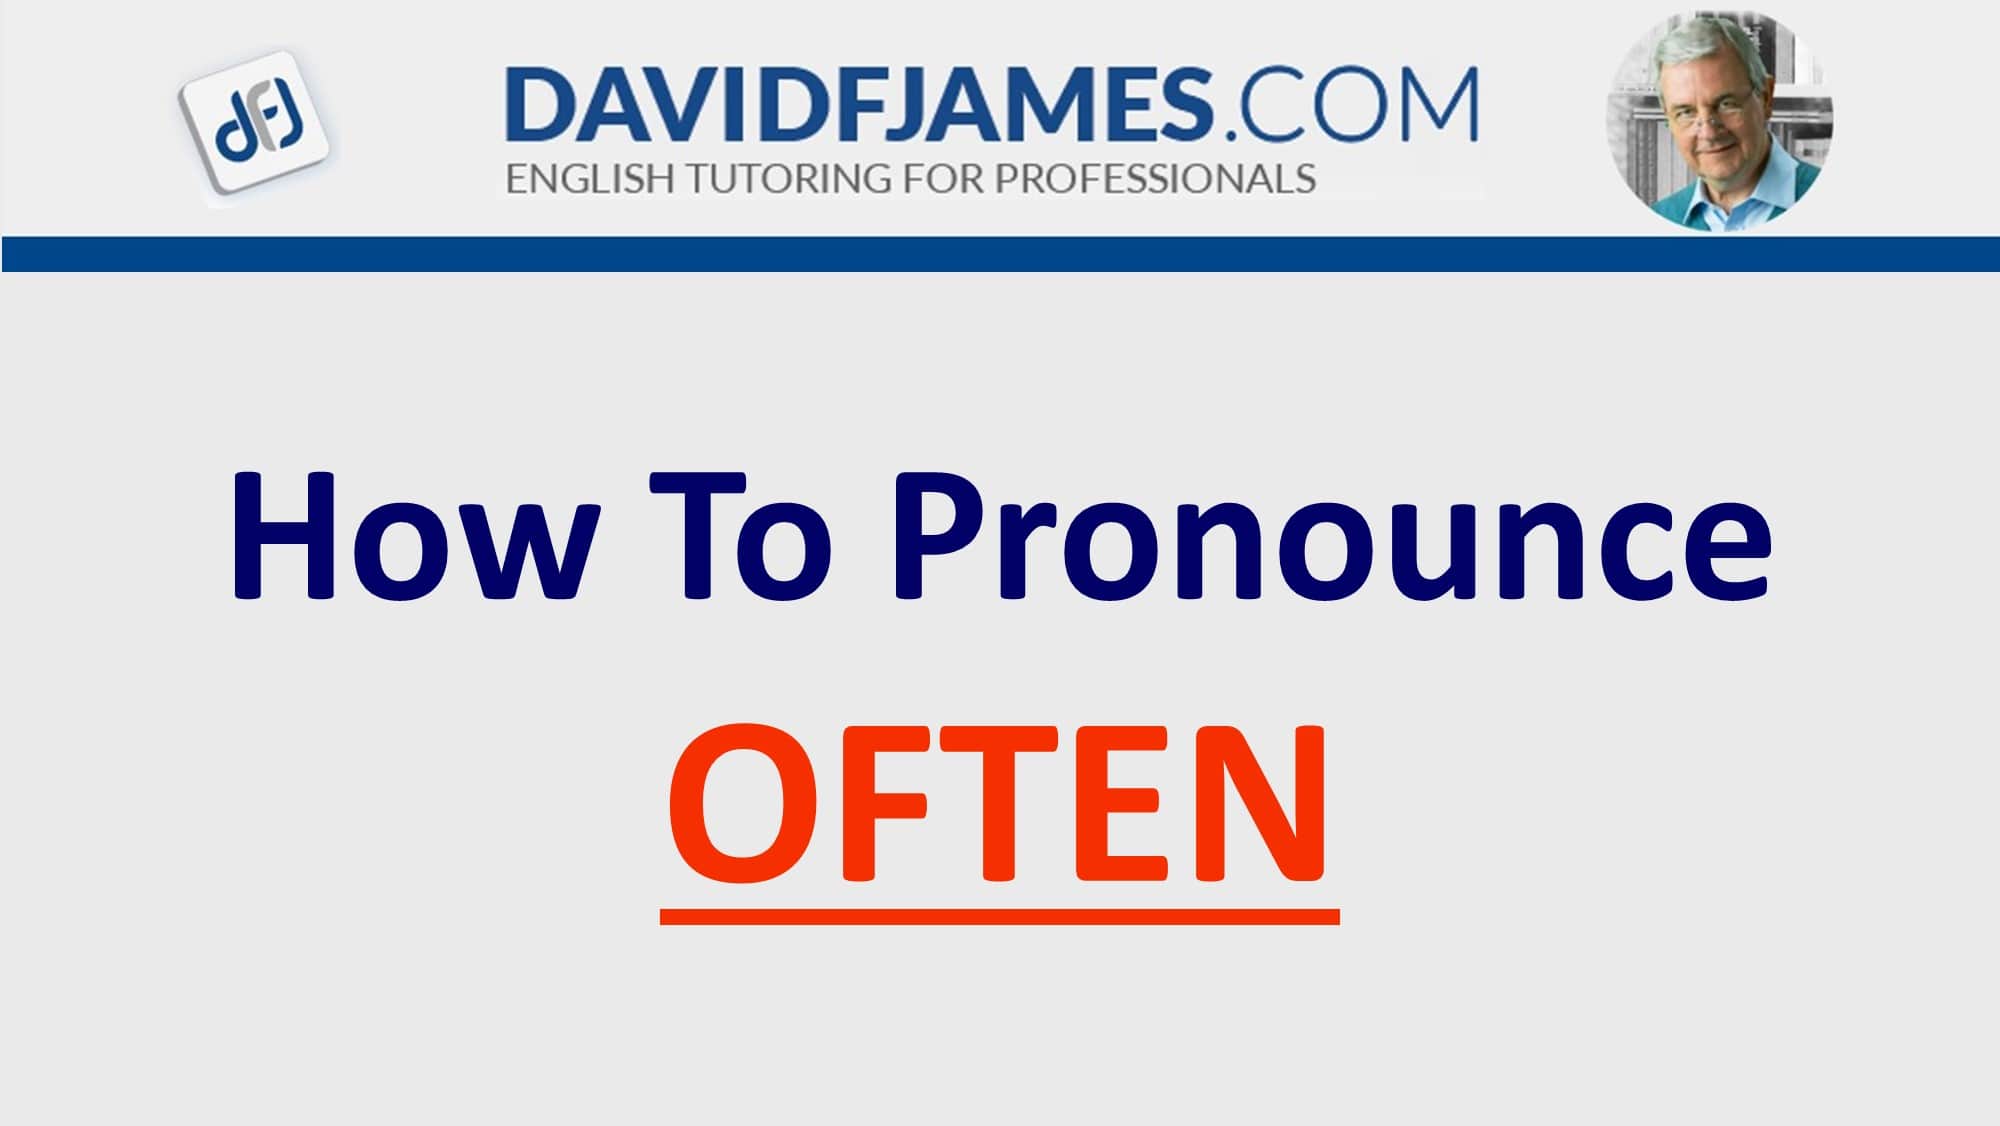 how to pronounce often - often in a sentence